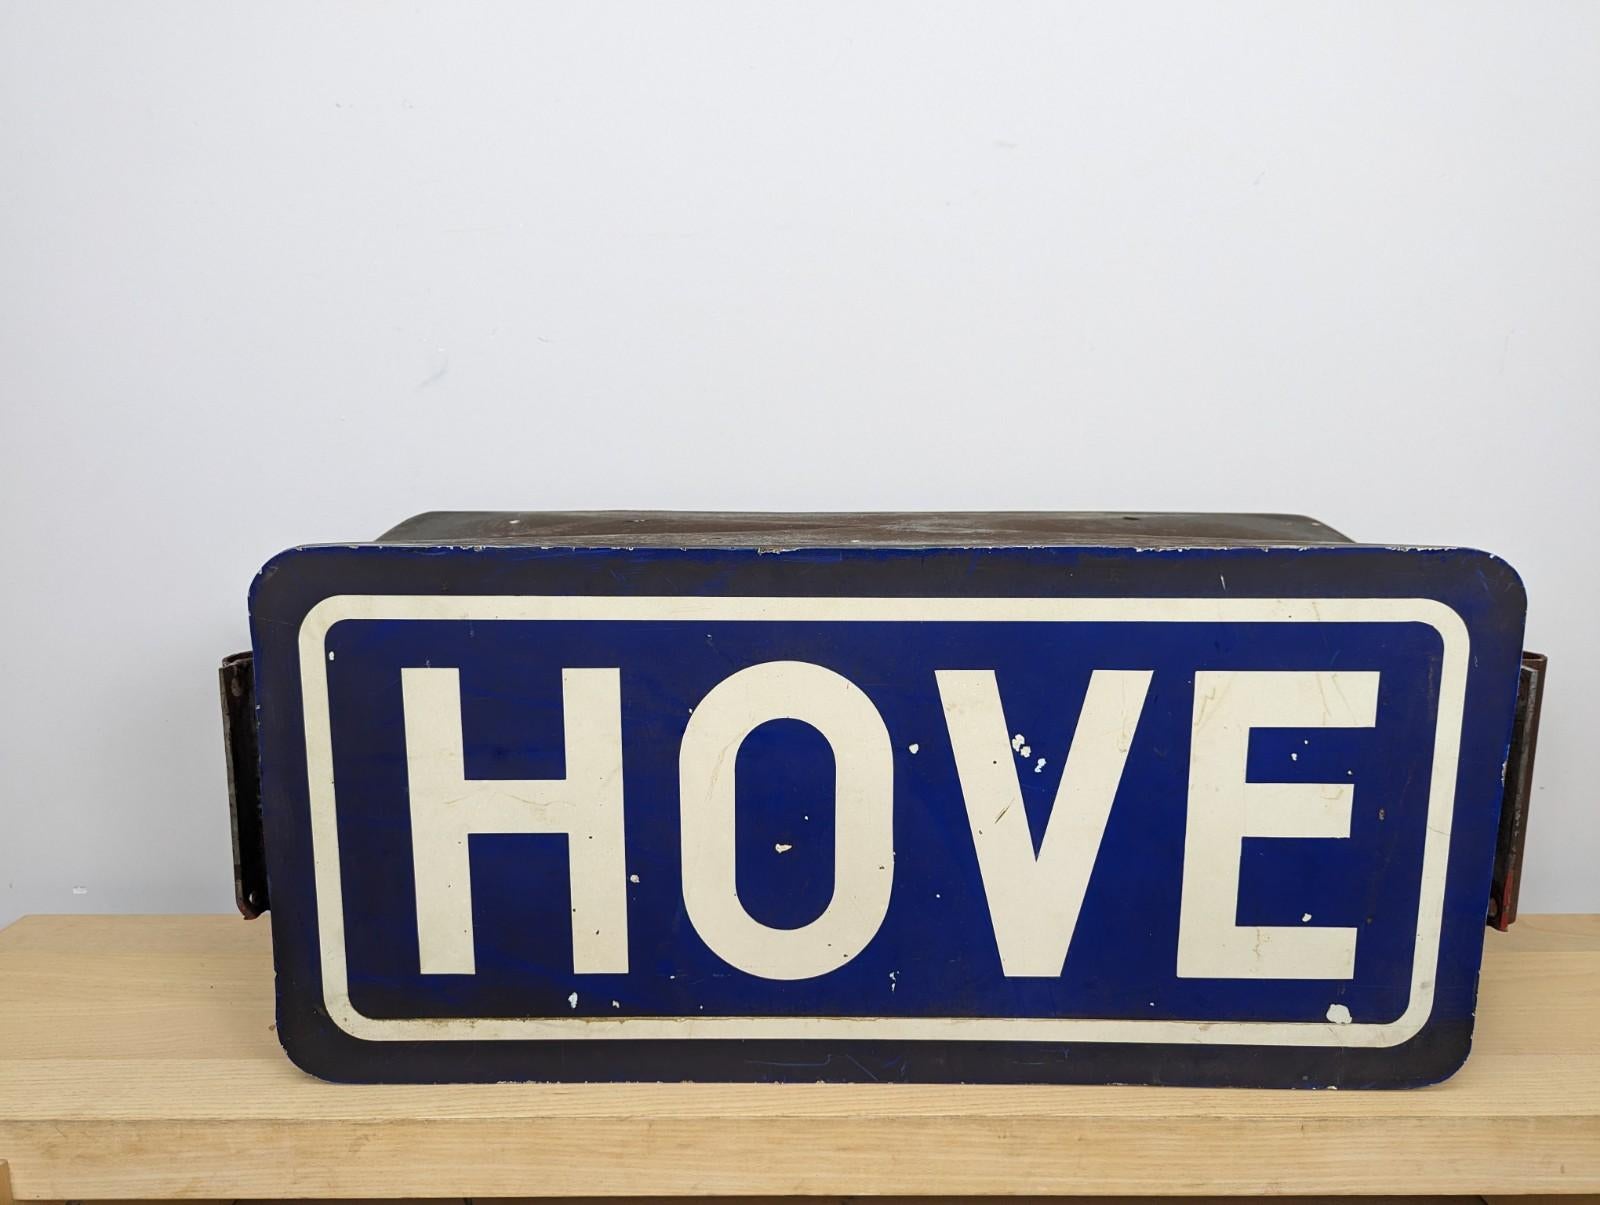 Large Midcentury Vintage 'Hove' Advertising Light Box For Sale 2